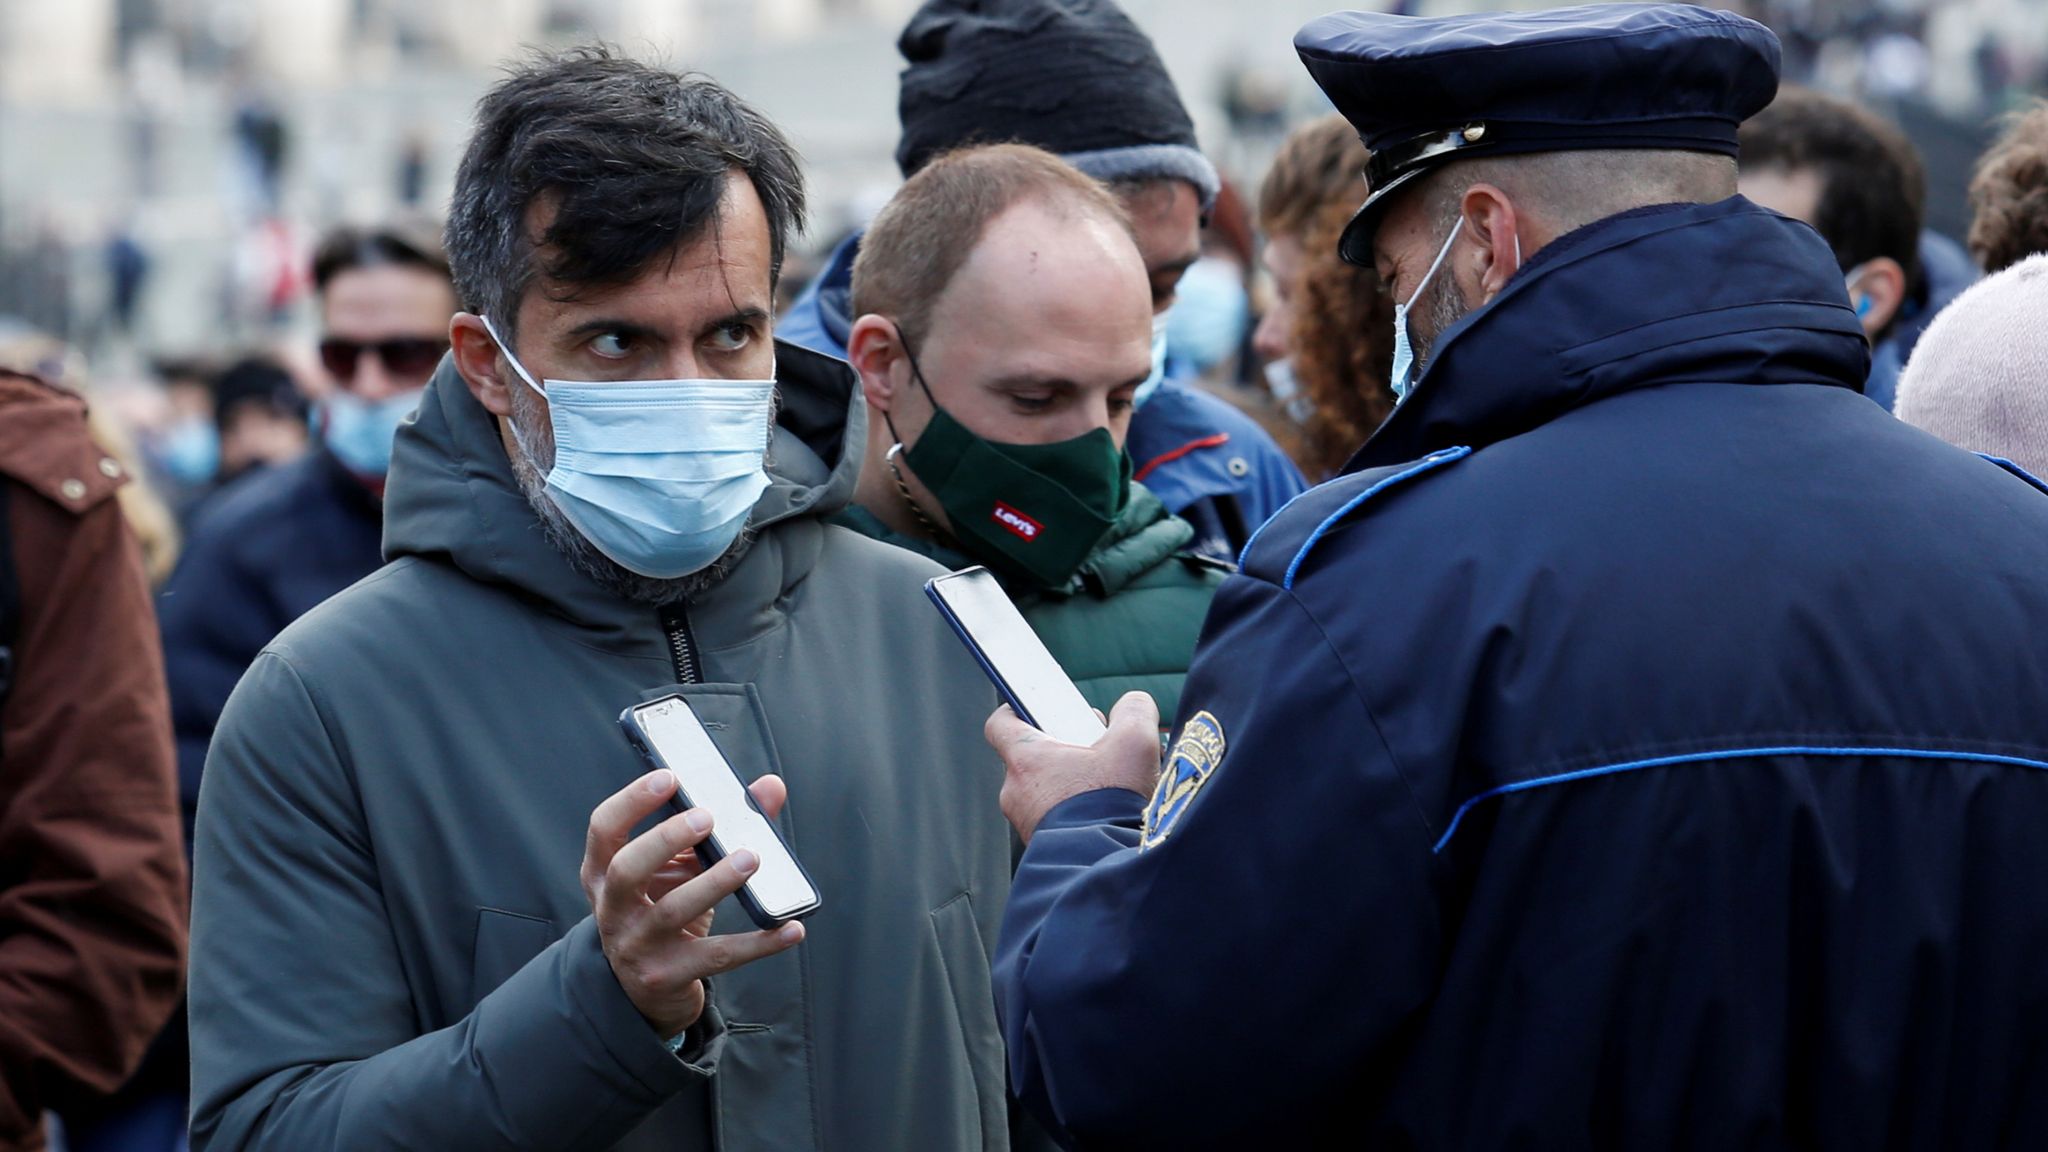 COVID-19: Italy brings in tougher restrictions for the unvaccinated - but  there are doubts as to how rules will be enforced | World News | Sky News